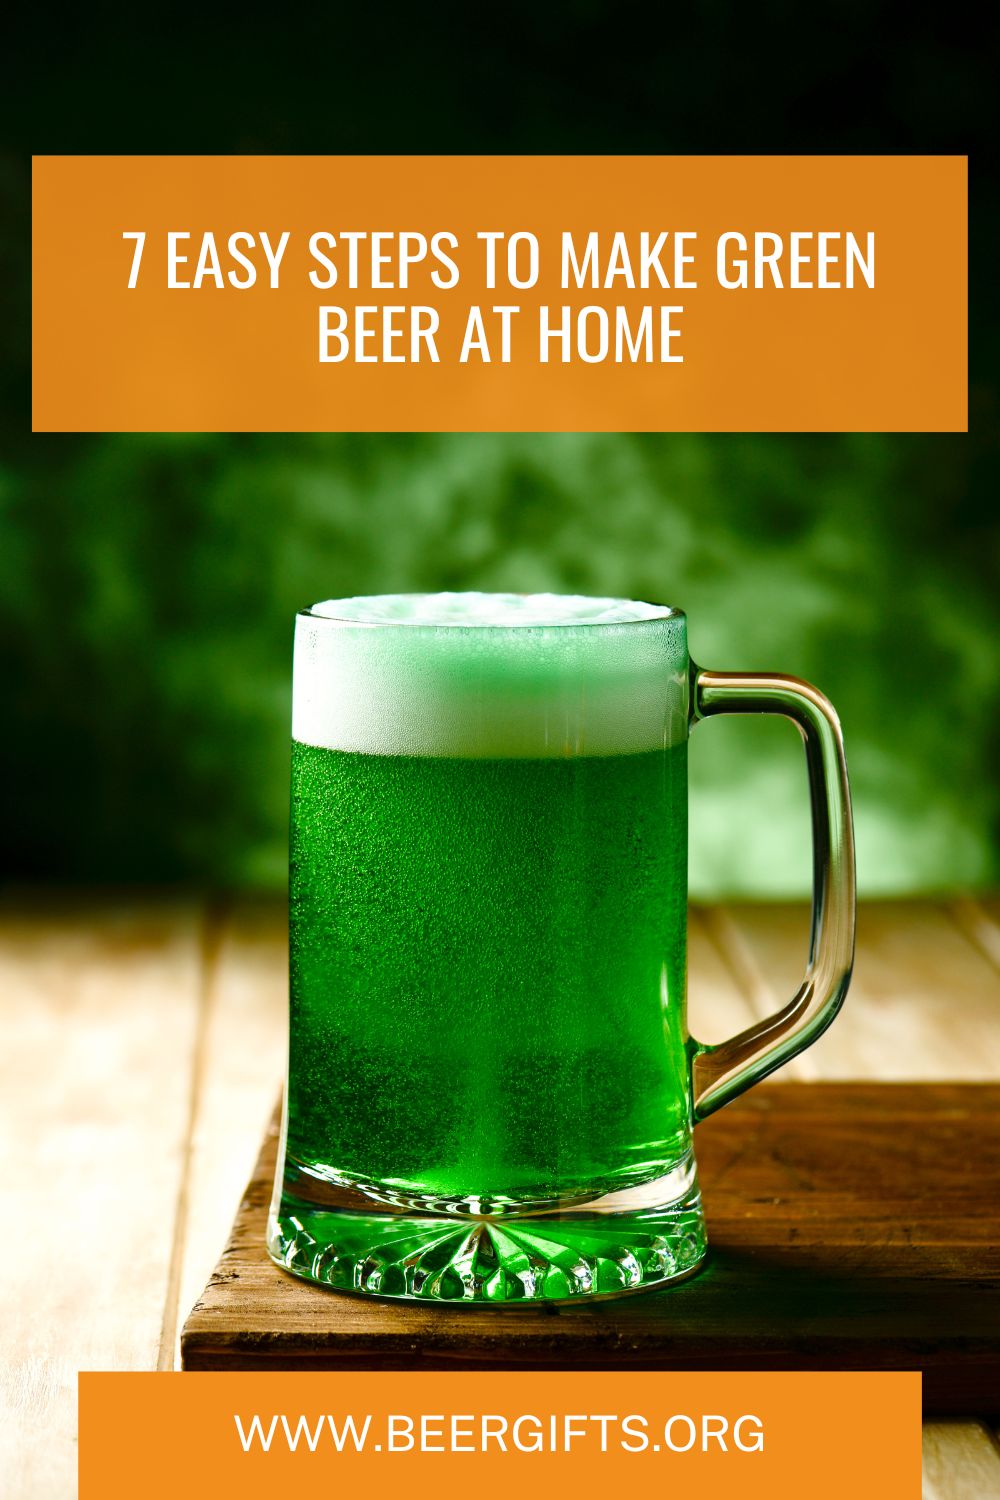 7 Easy Steps to Make Green Beer at Home2